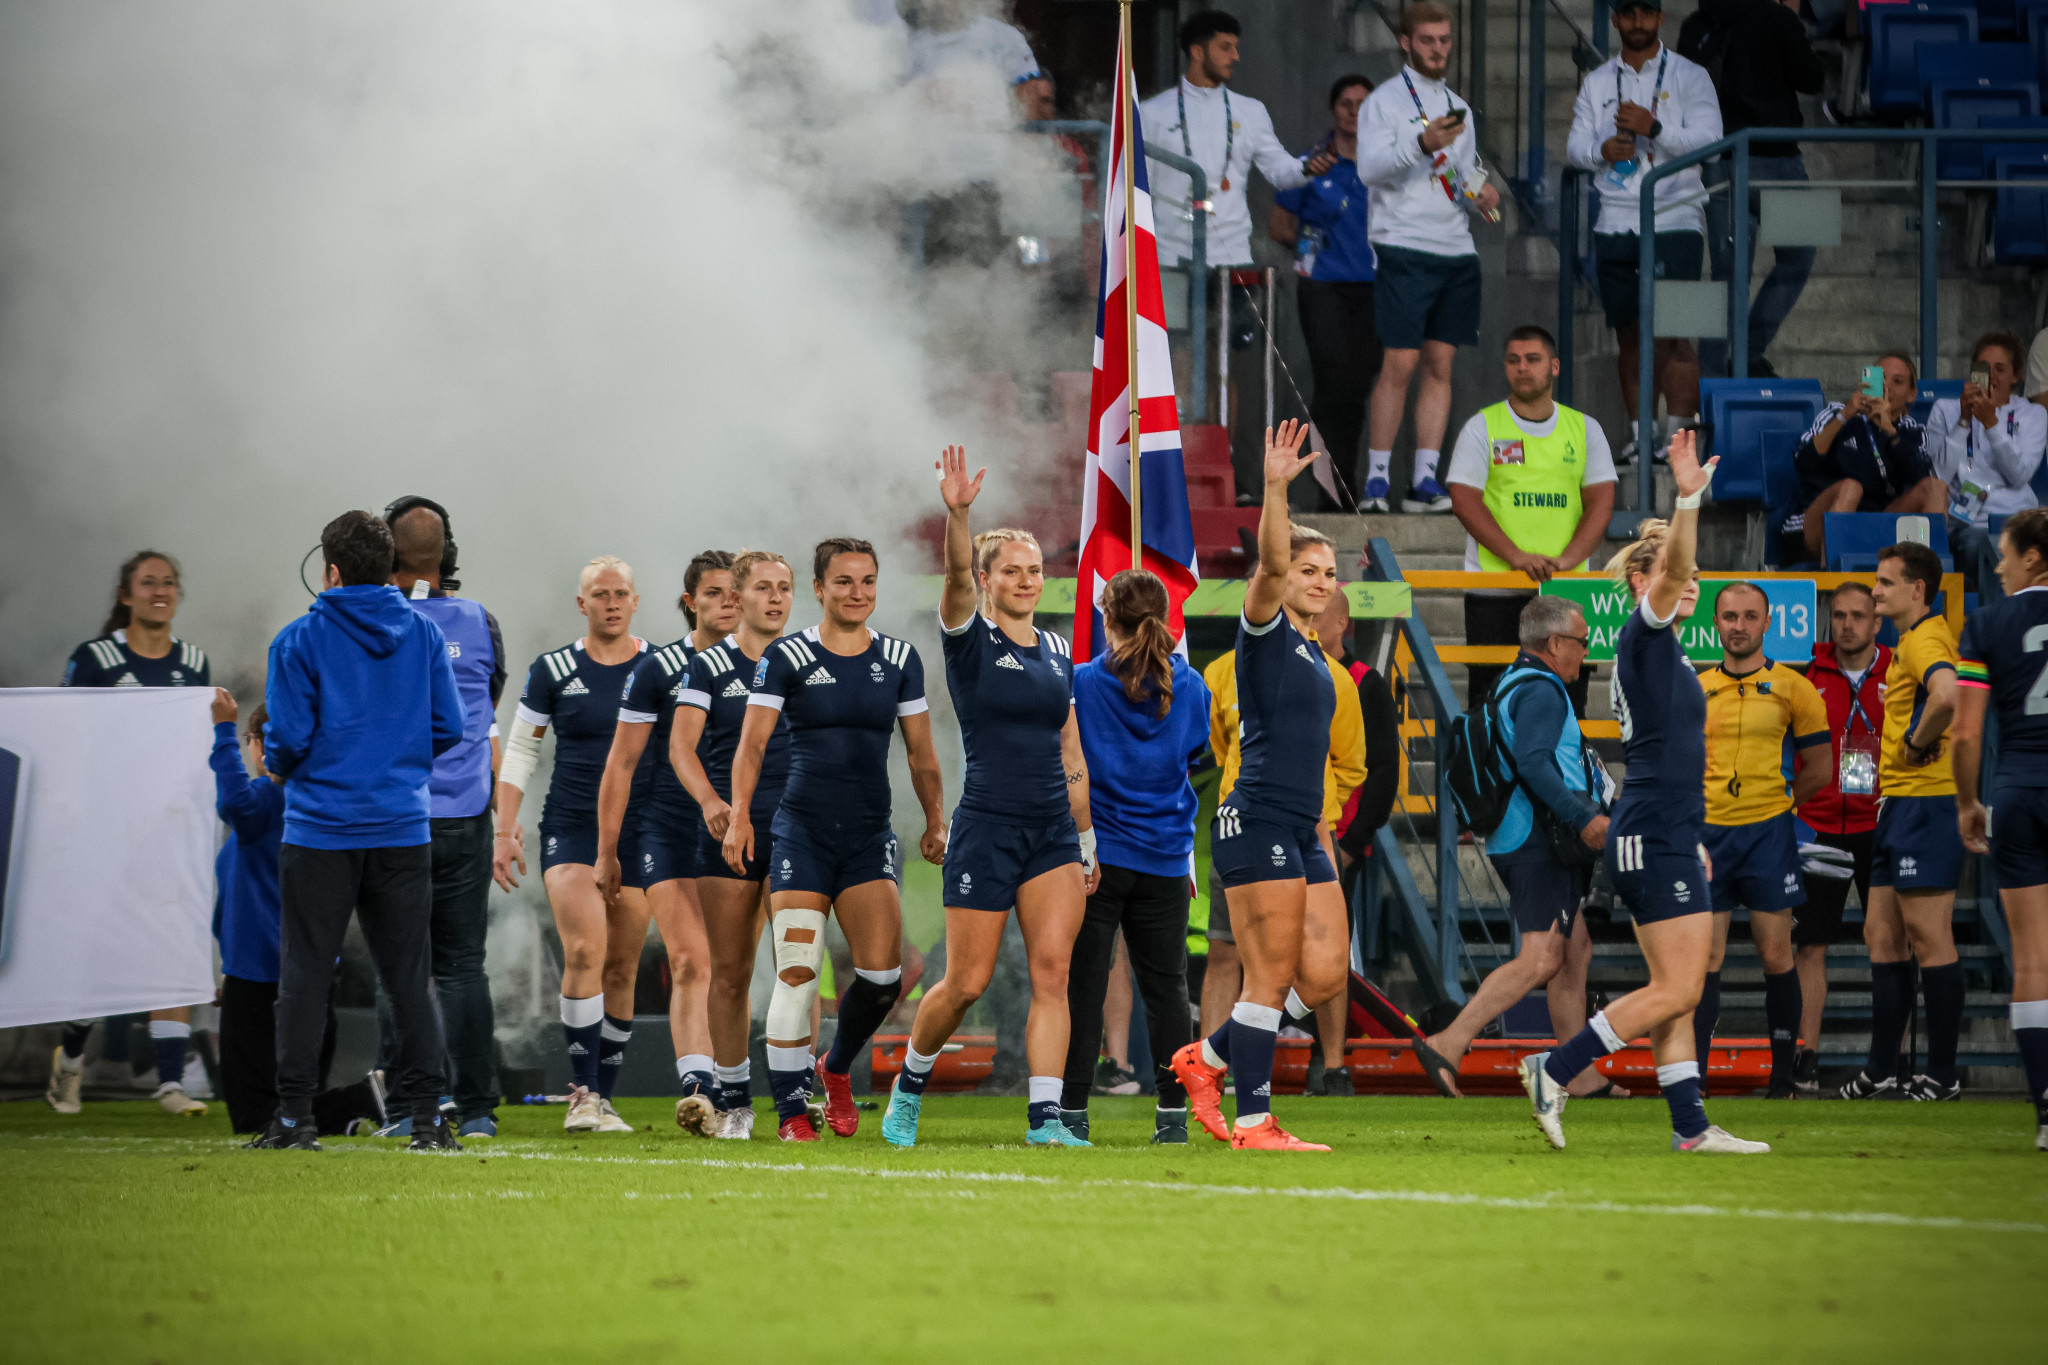 Britain's women beat hosts Poland 33-0 in the women's rugby sevens final to seal a place at the Paris 2024 Olympics ©Kraków-Małopolska 2023